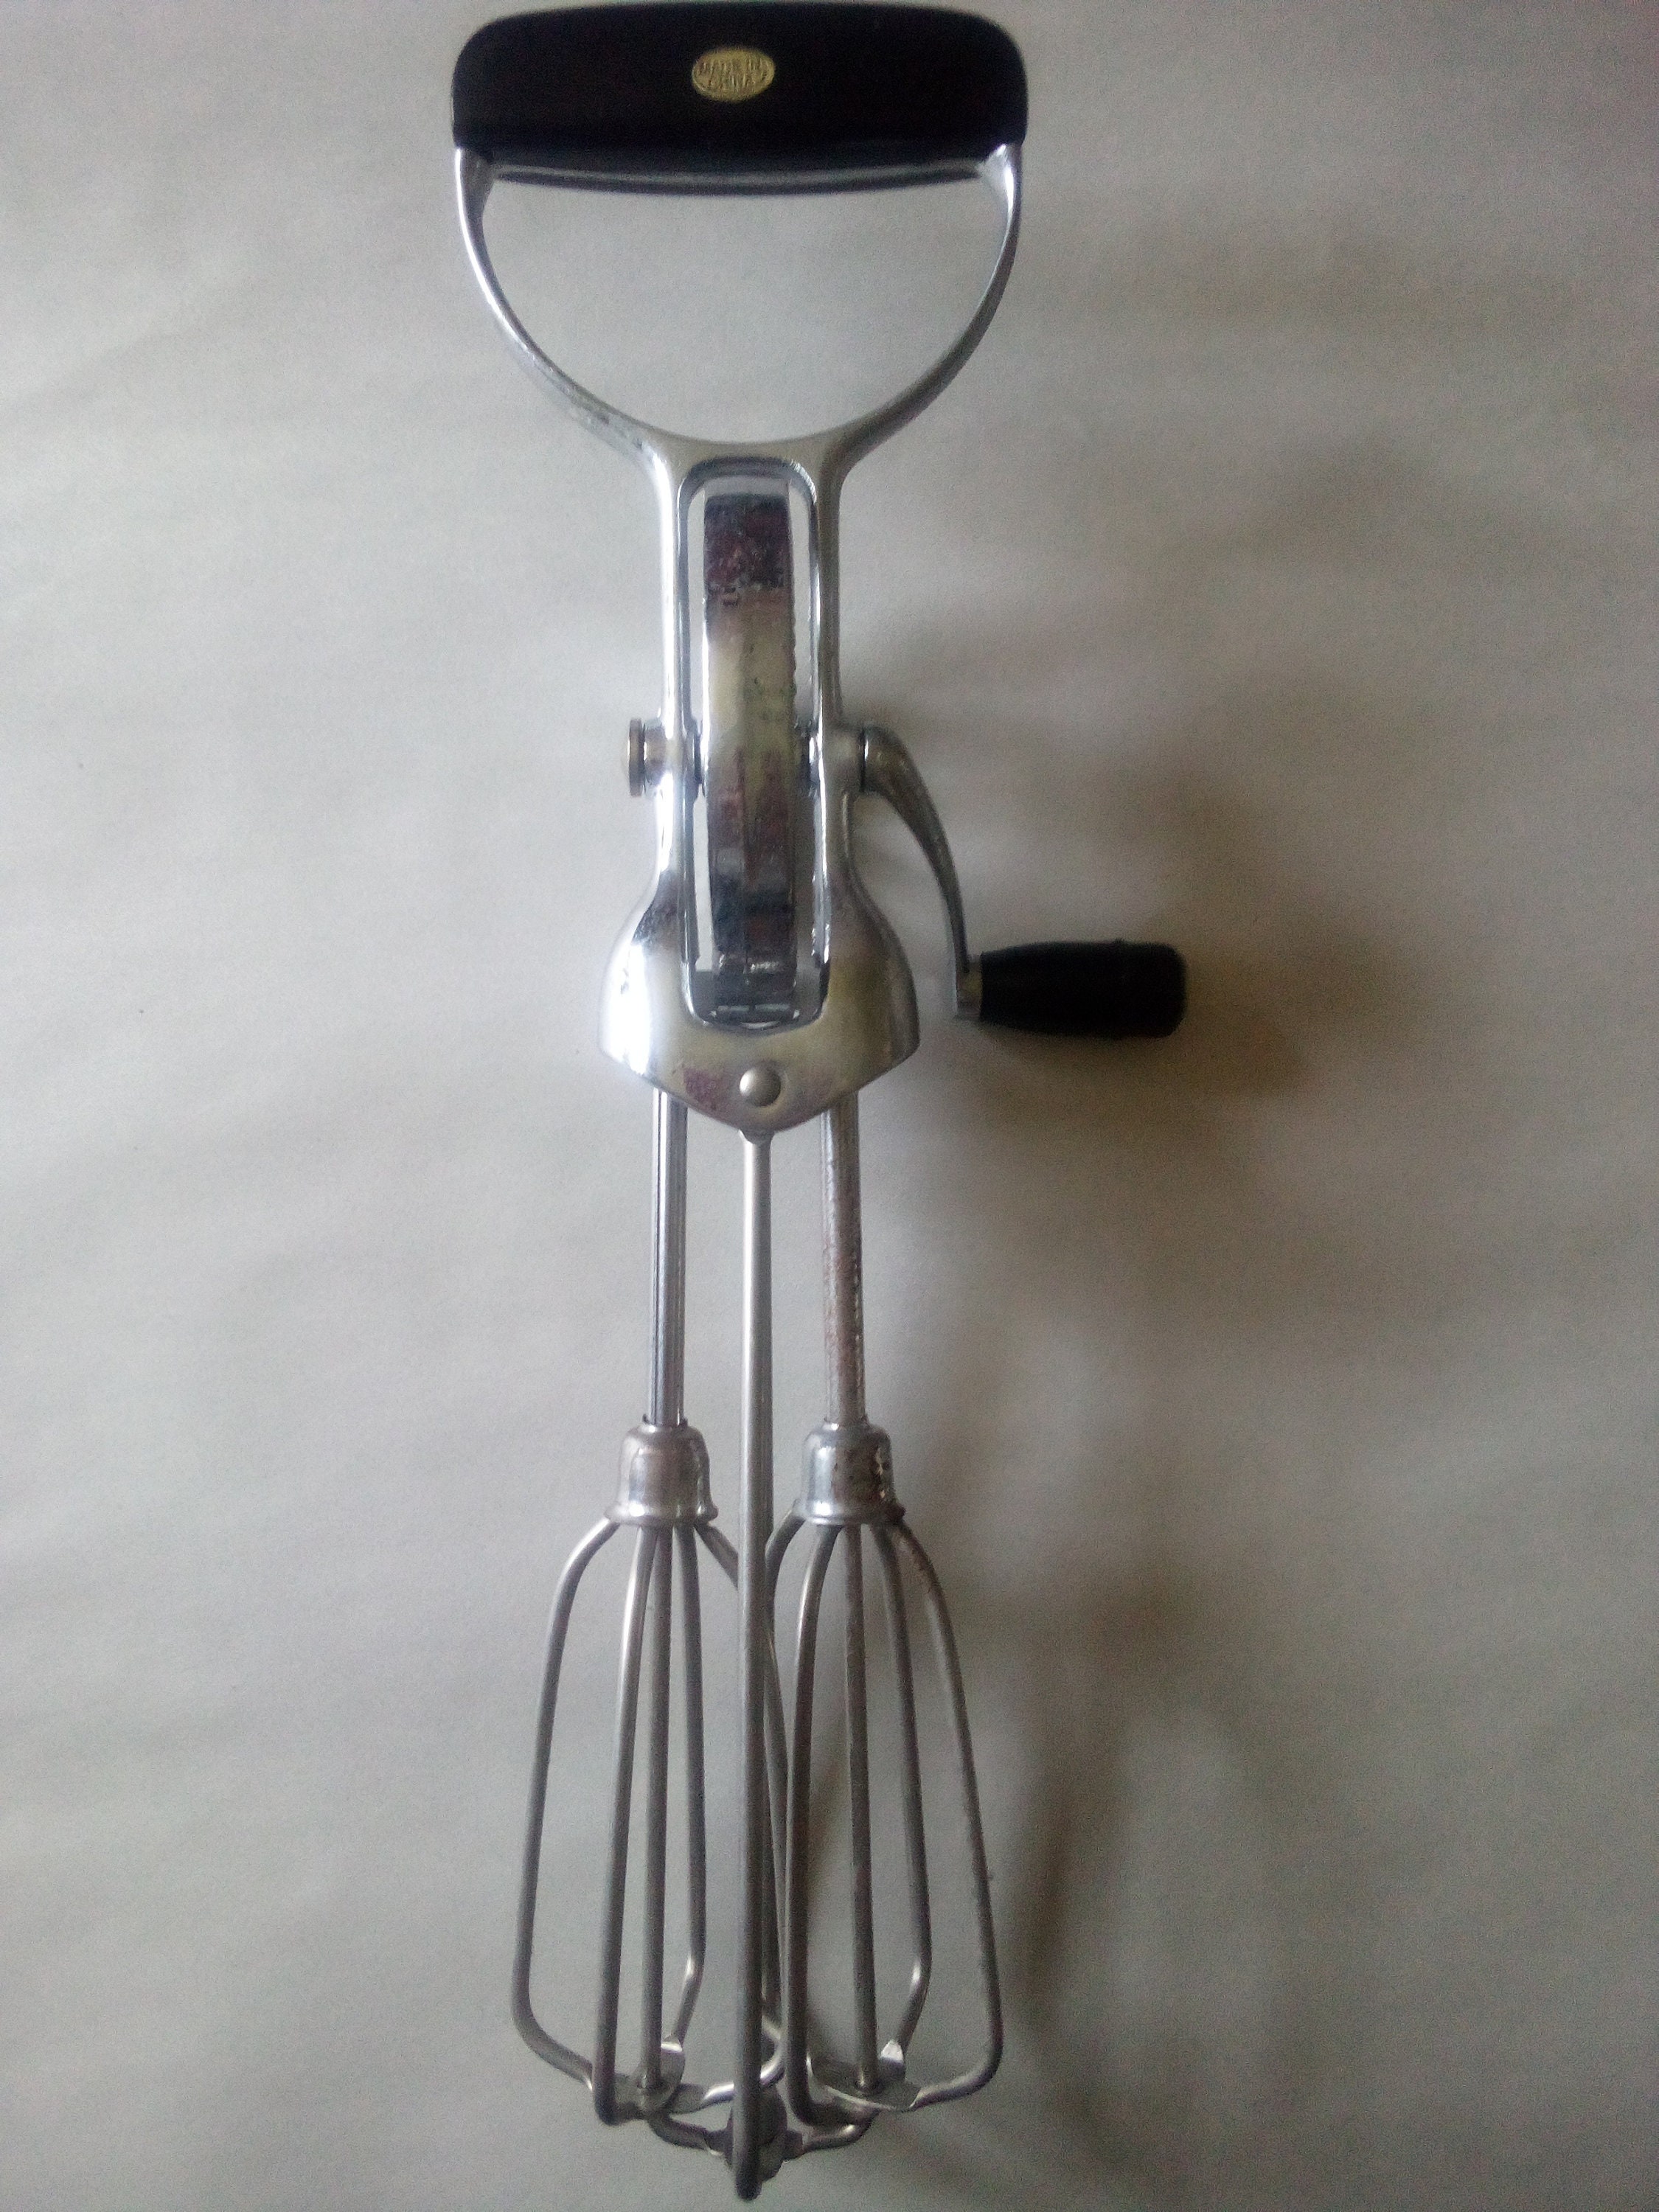 Vintage Battery Operated Hand Whisk / Cocktail Mixer. Needs